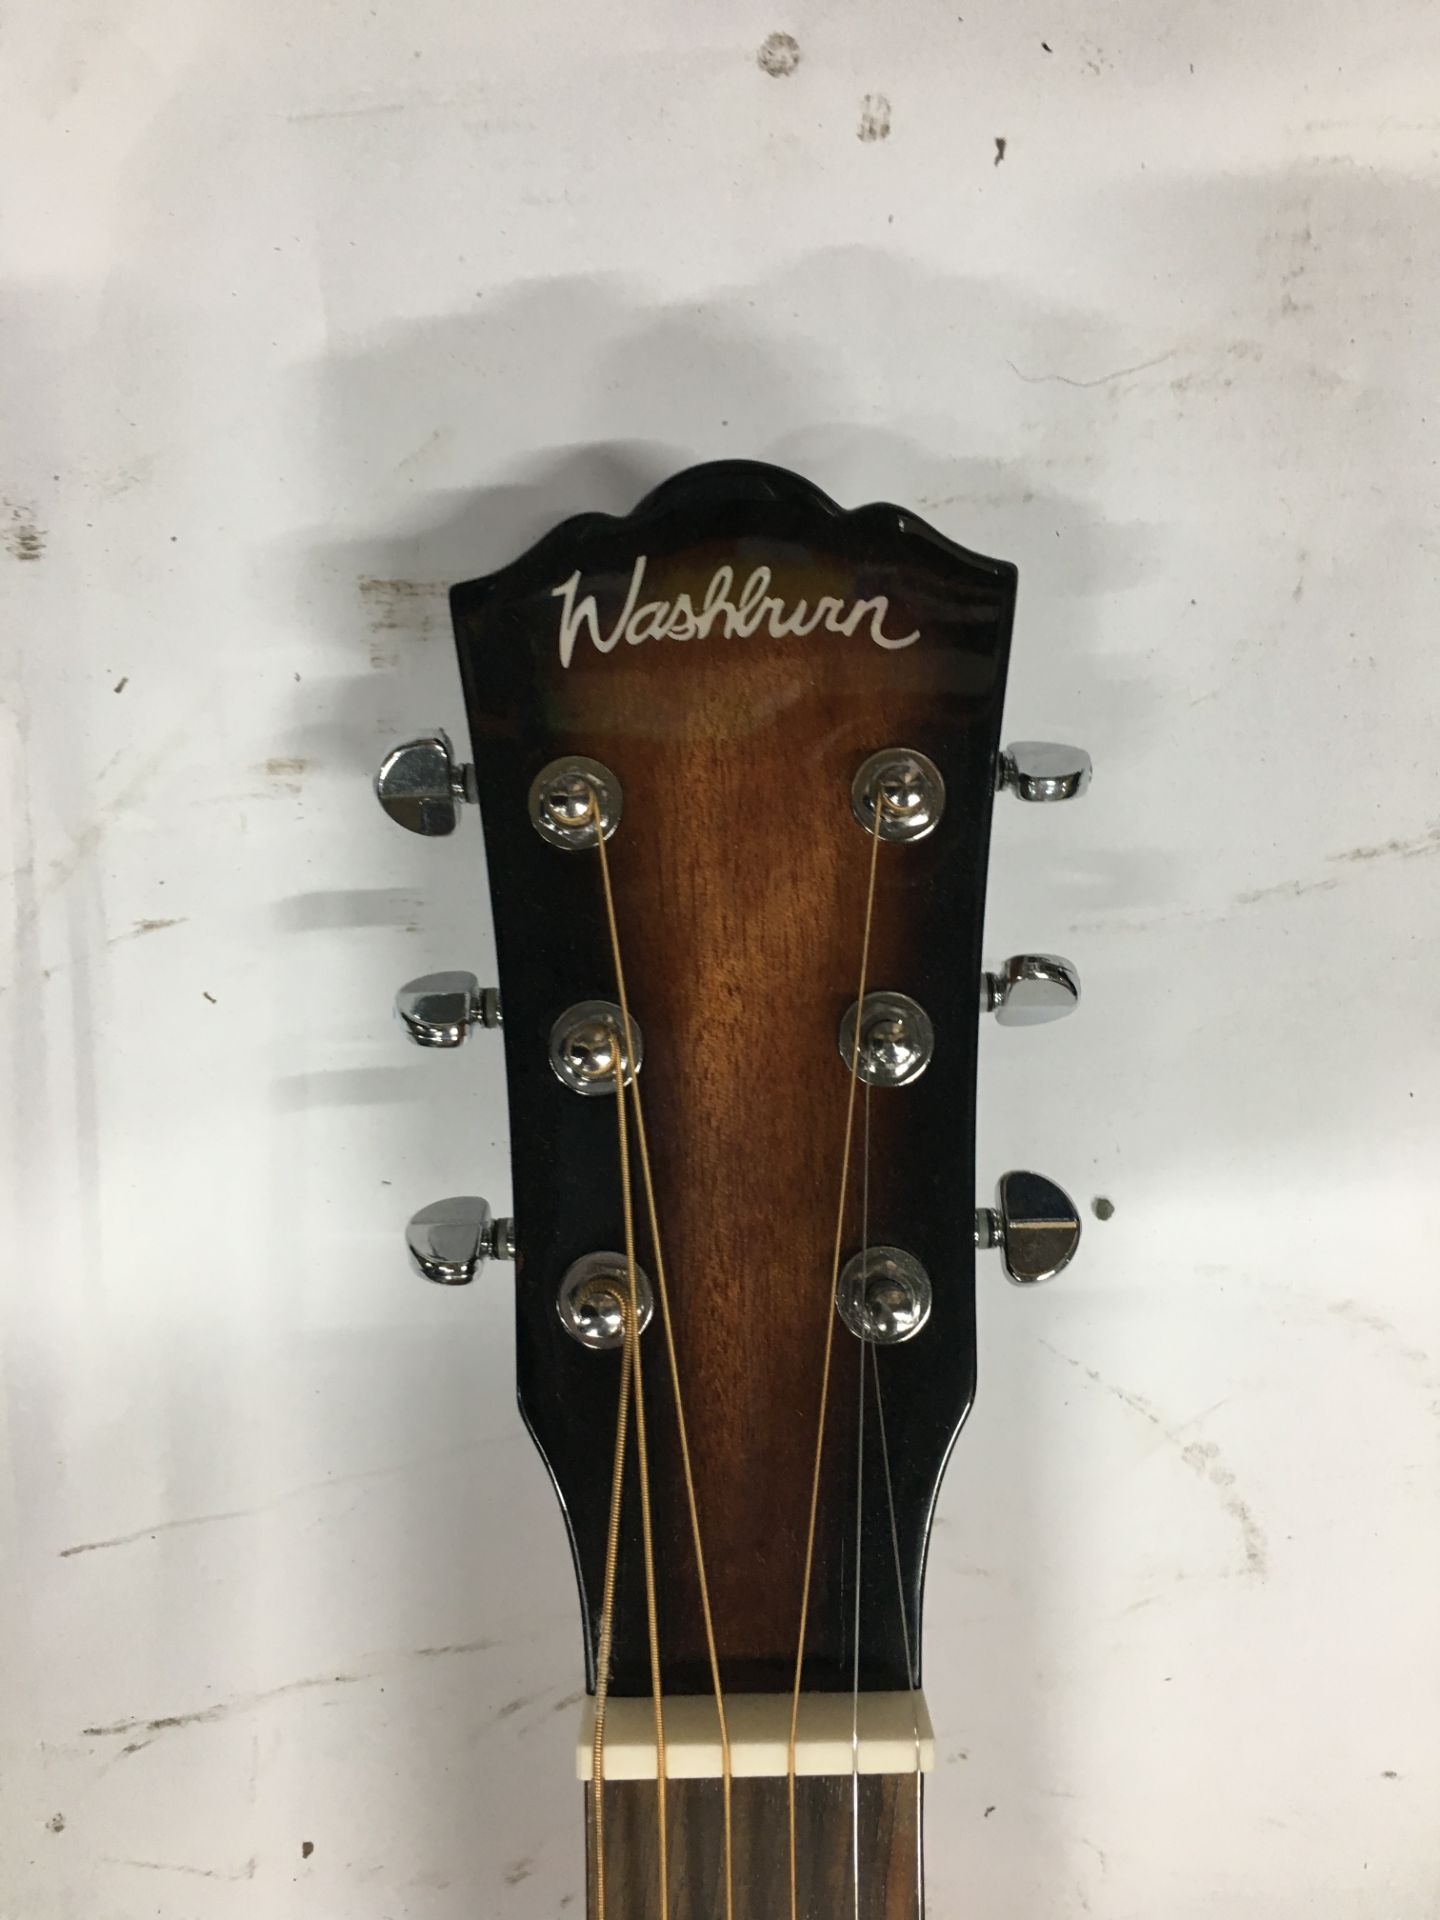 Washburn Square Neck Resonator Acoustic Guitar | New | In bag | RRP £299 - Image 3 of 3